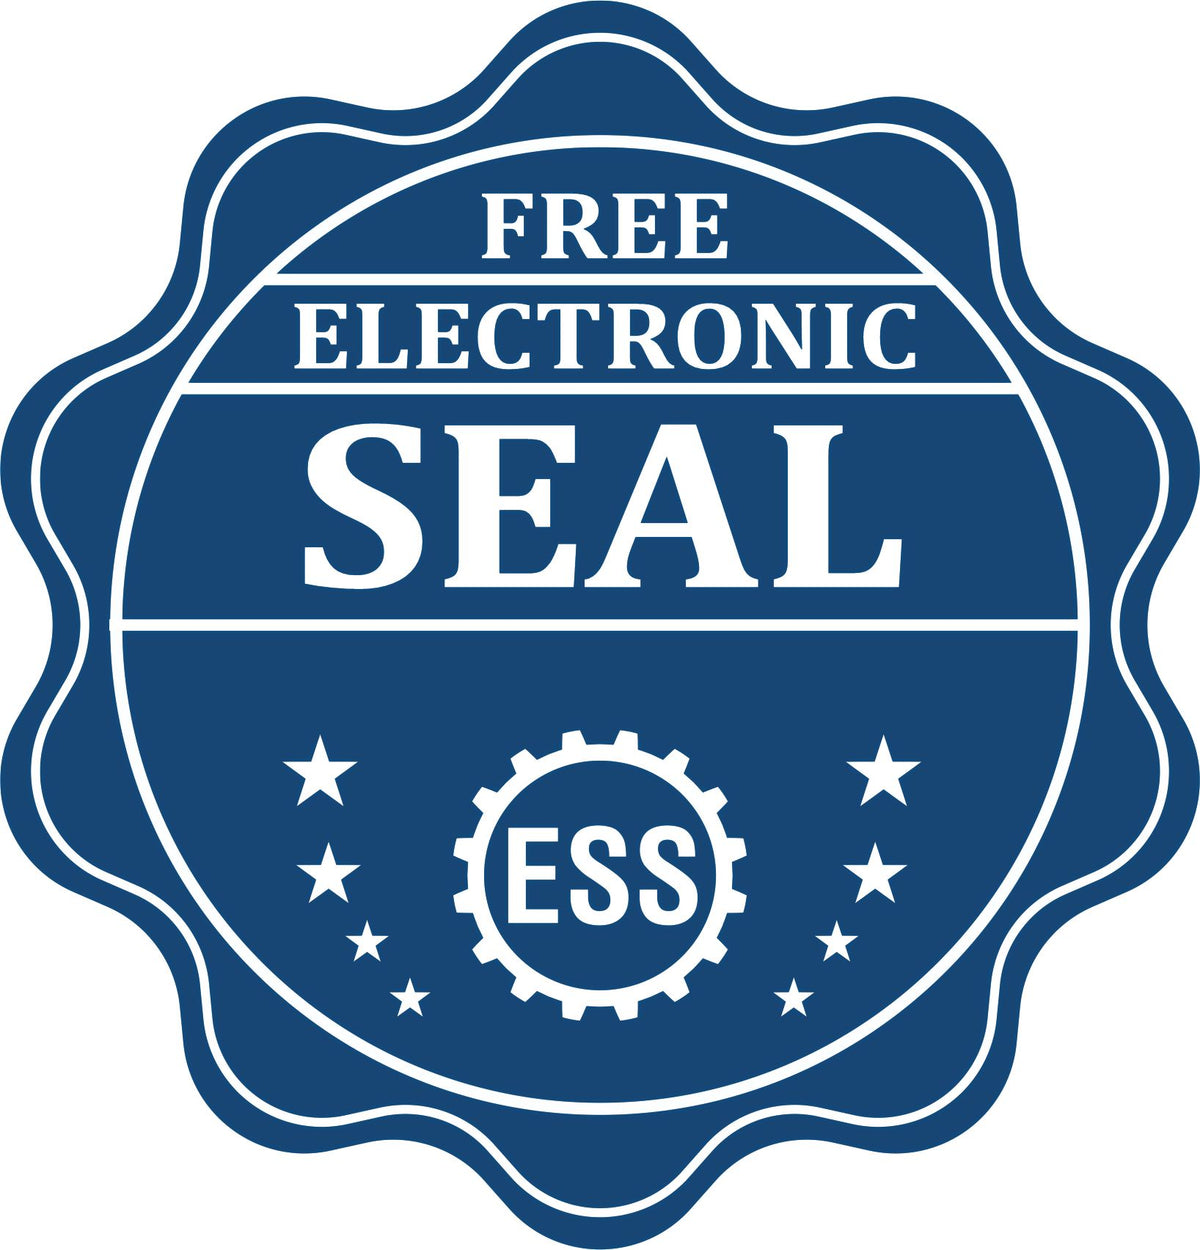 A badge showing a free electronic seal for the Heavy Duty Cast Iron Iowa Geologist Seal Embosser with stars and the ESS gear on the emblem.